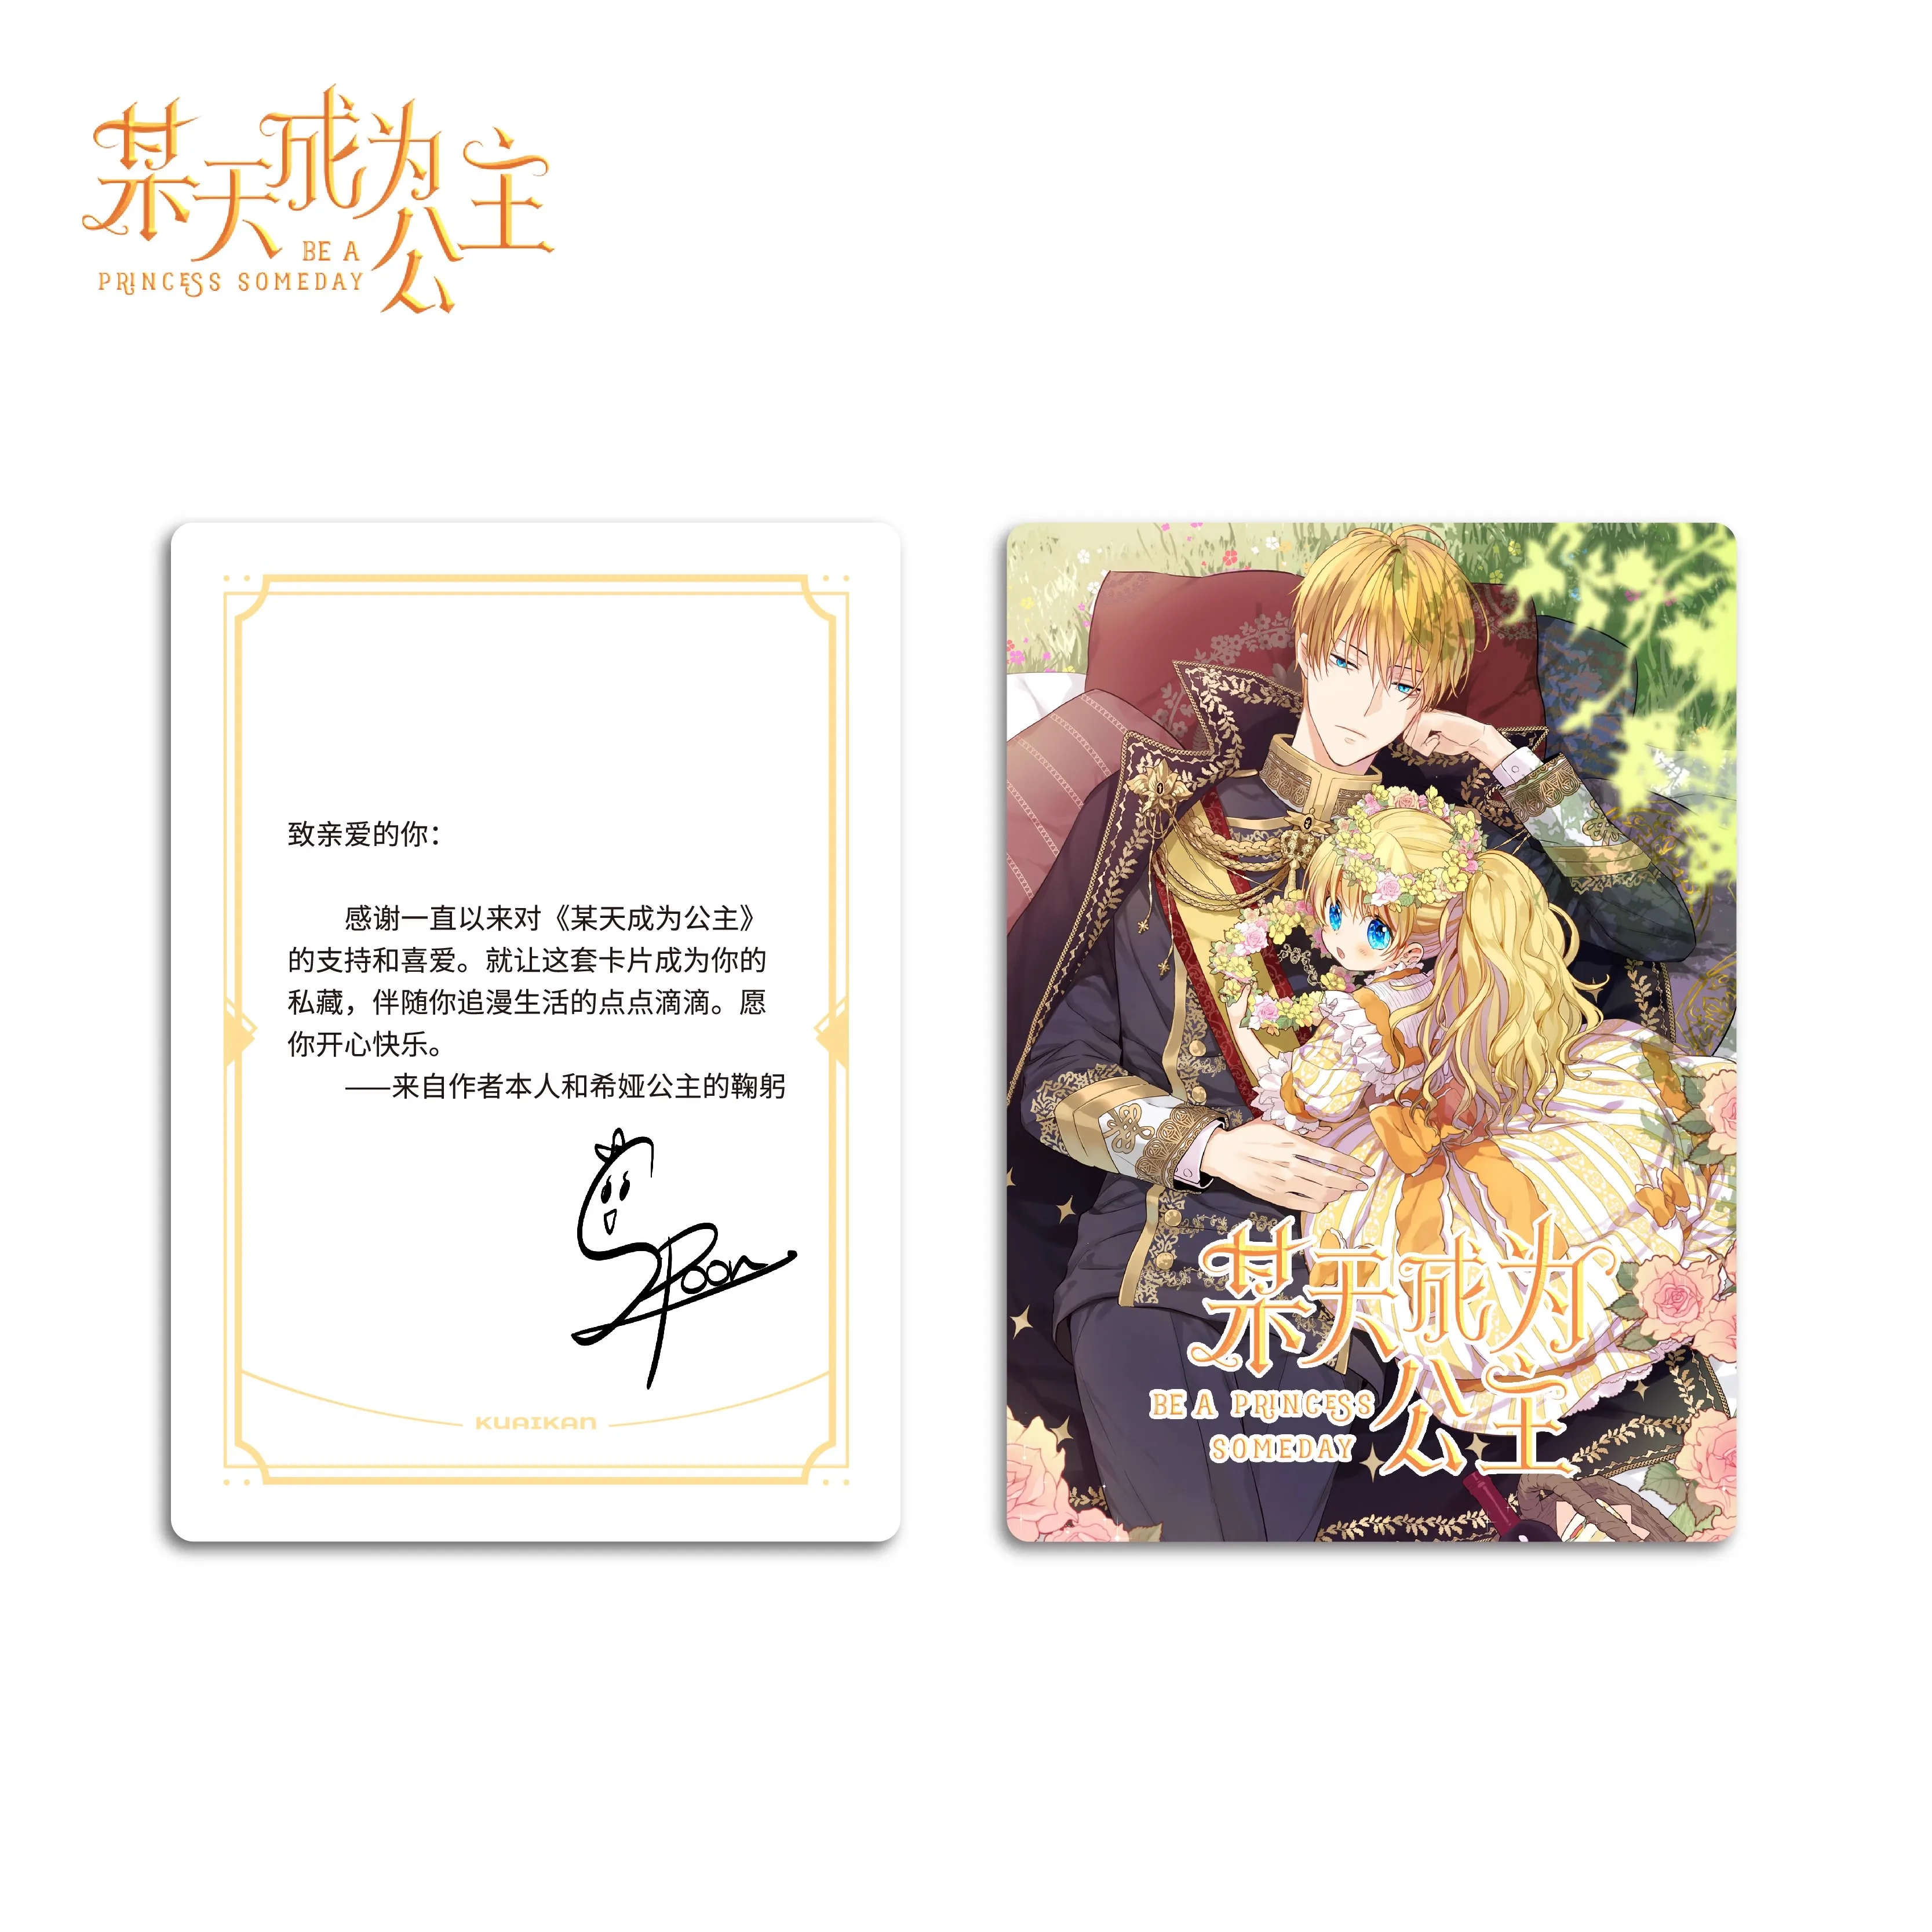 New Comic Be A Princess Someday Lomo Card Princess Sia and Claude Cartoon Figure Laser Card Collection Cards Fans Gift